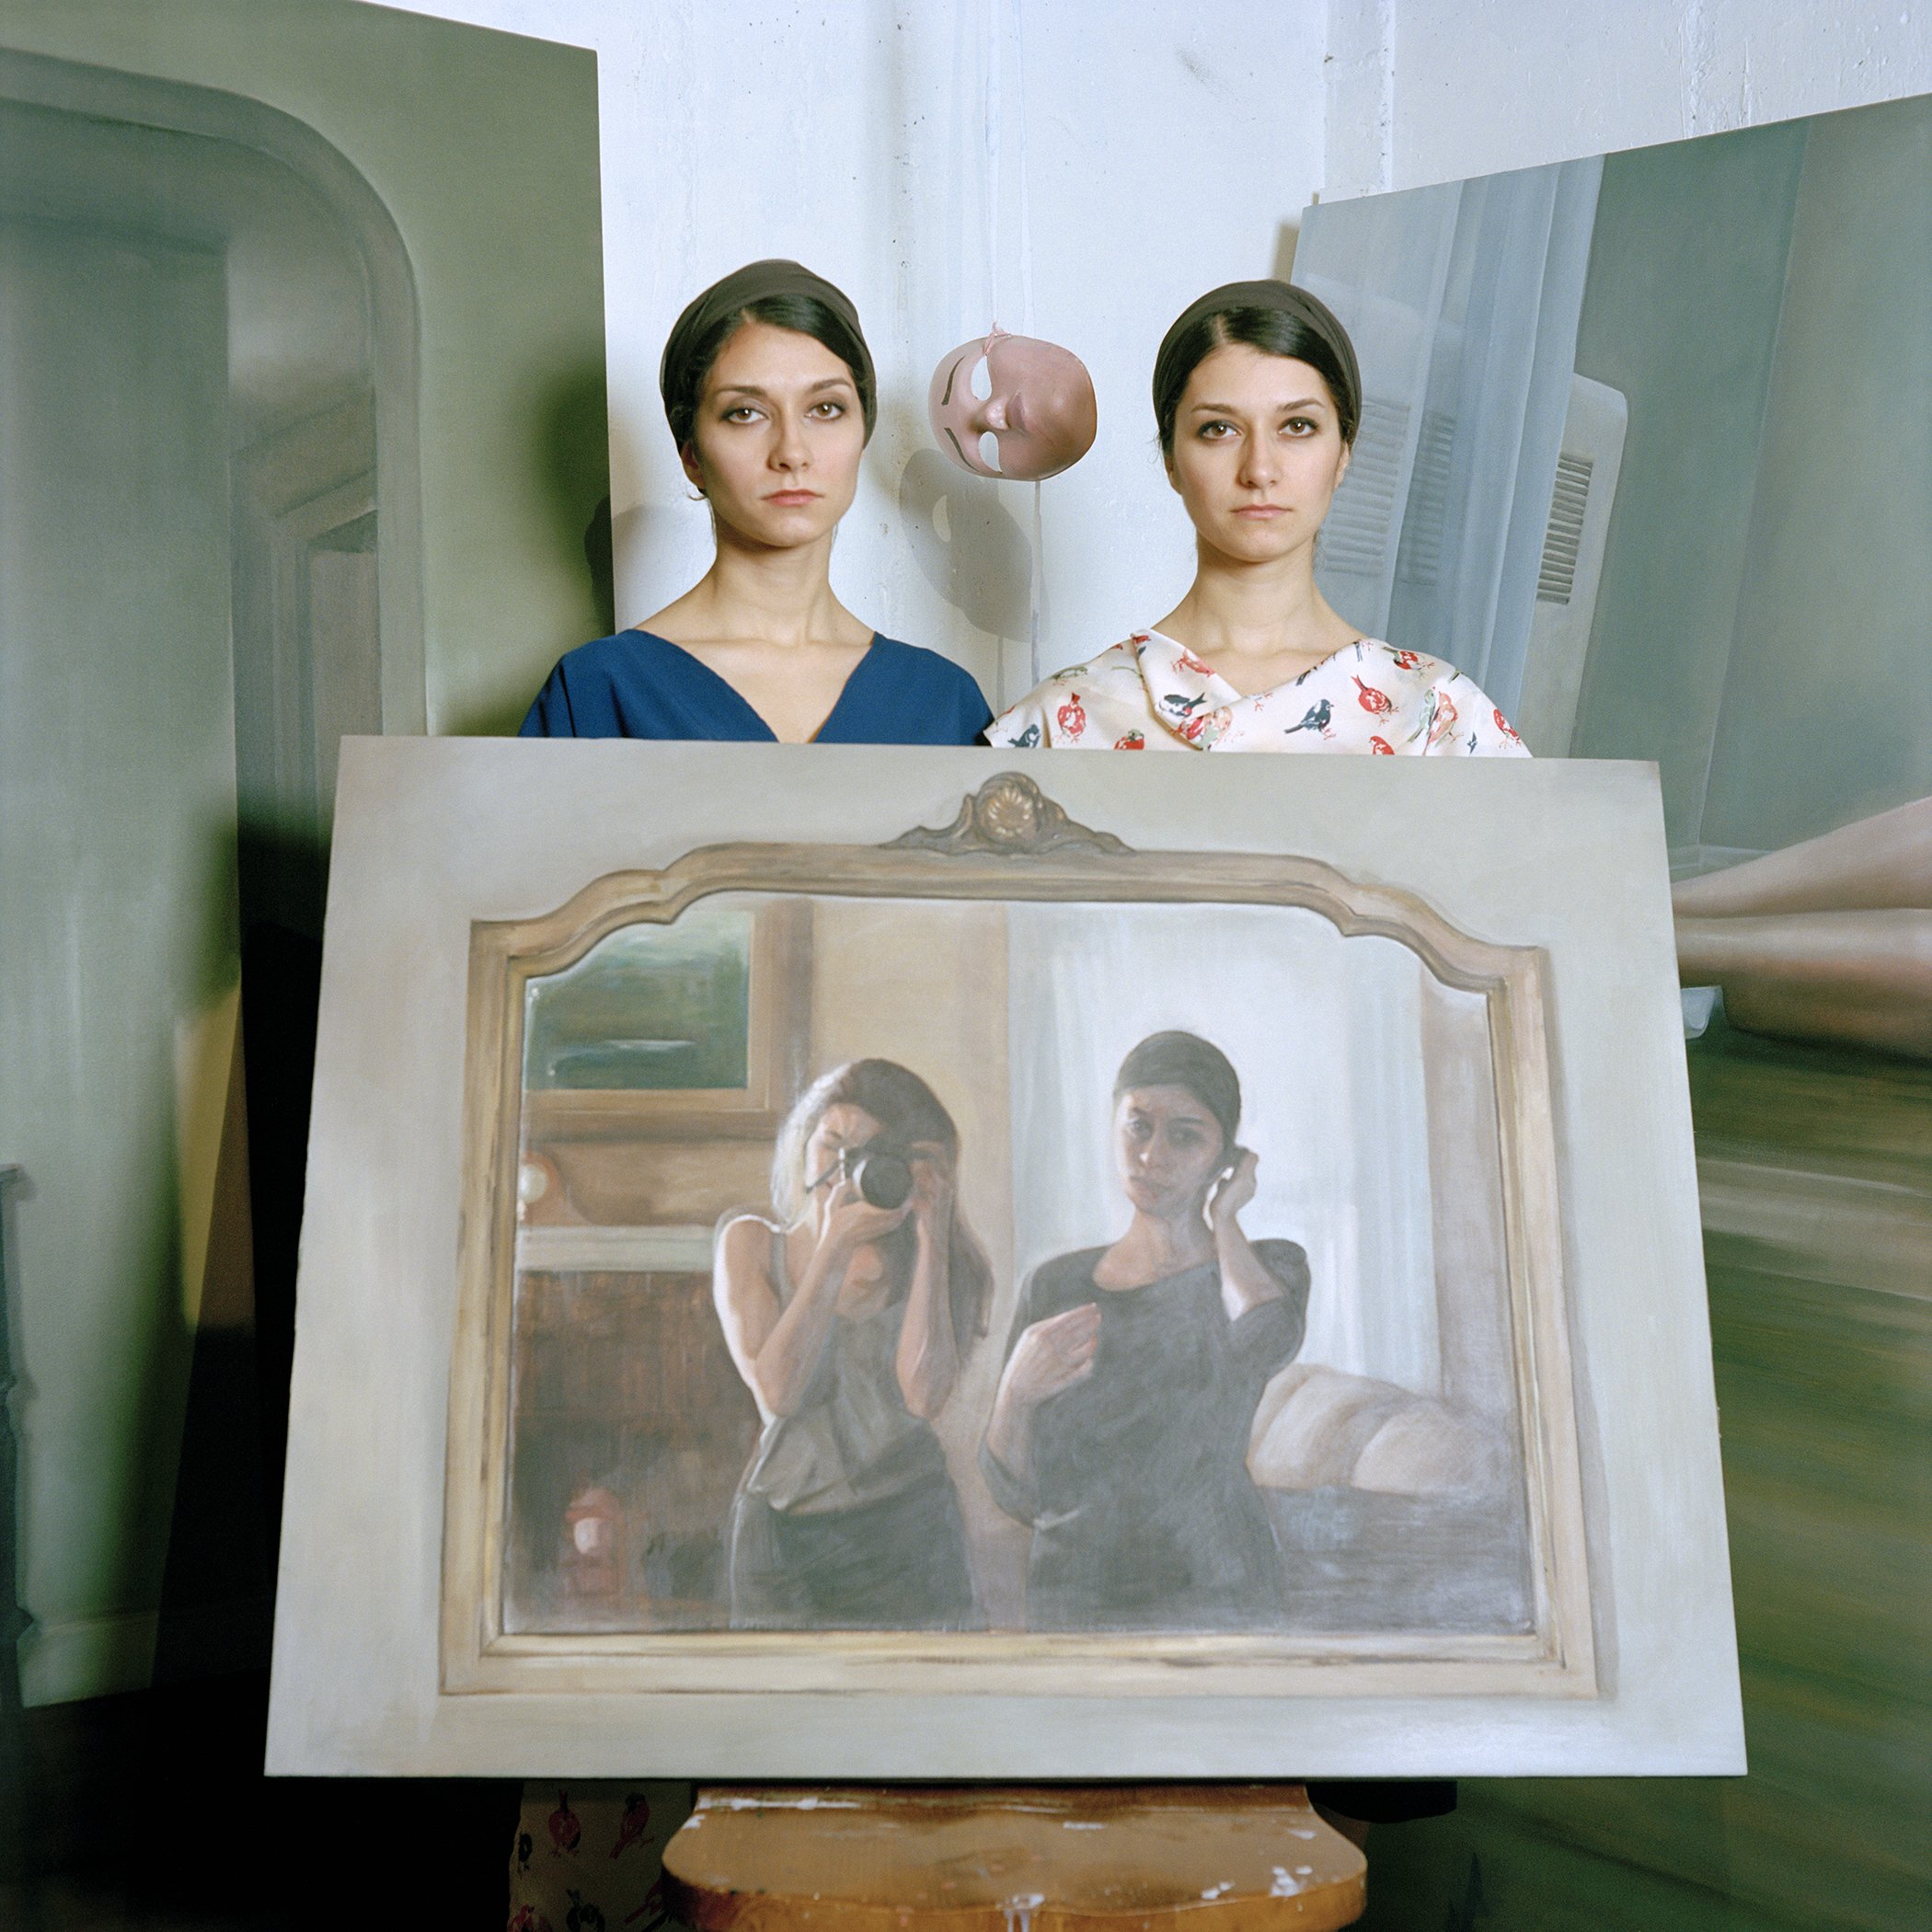 Photograph of twins holding a painting of themselves, taken by top NFT photographer Justin Aversano